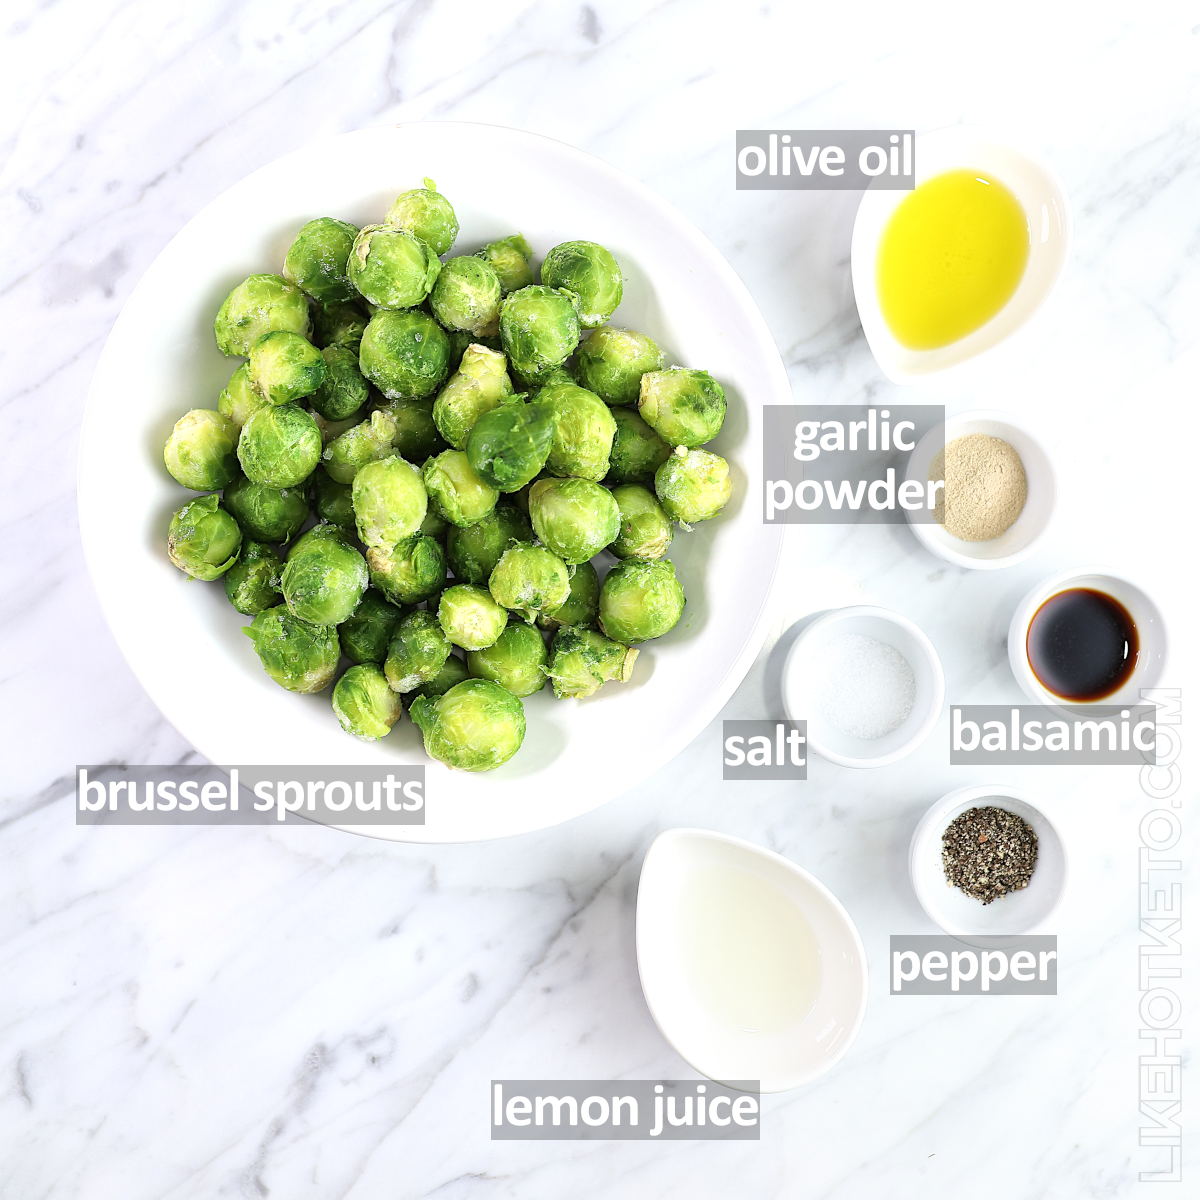 labeled ingredients for air fryer frozen Brussel sprouts.